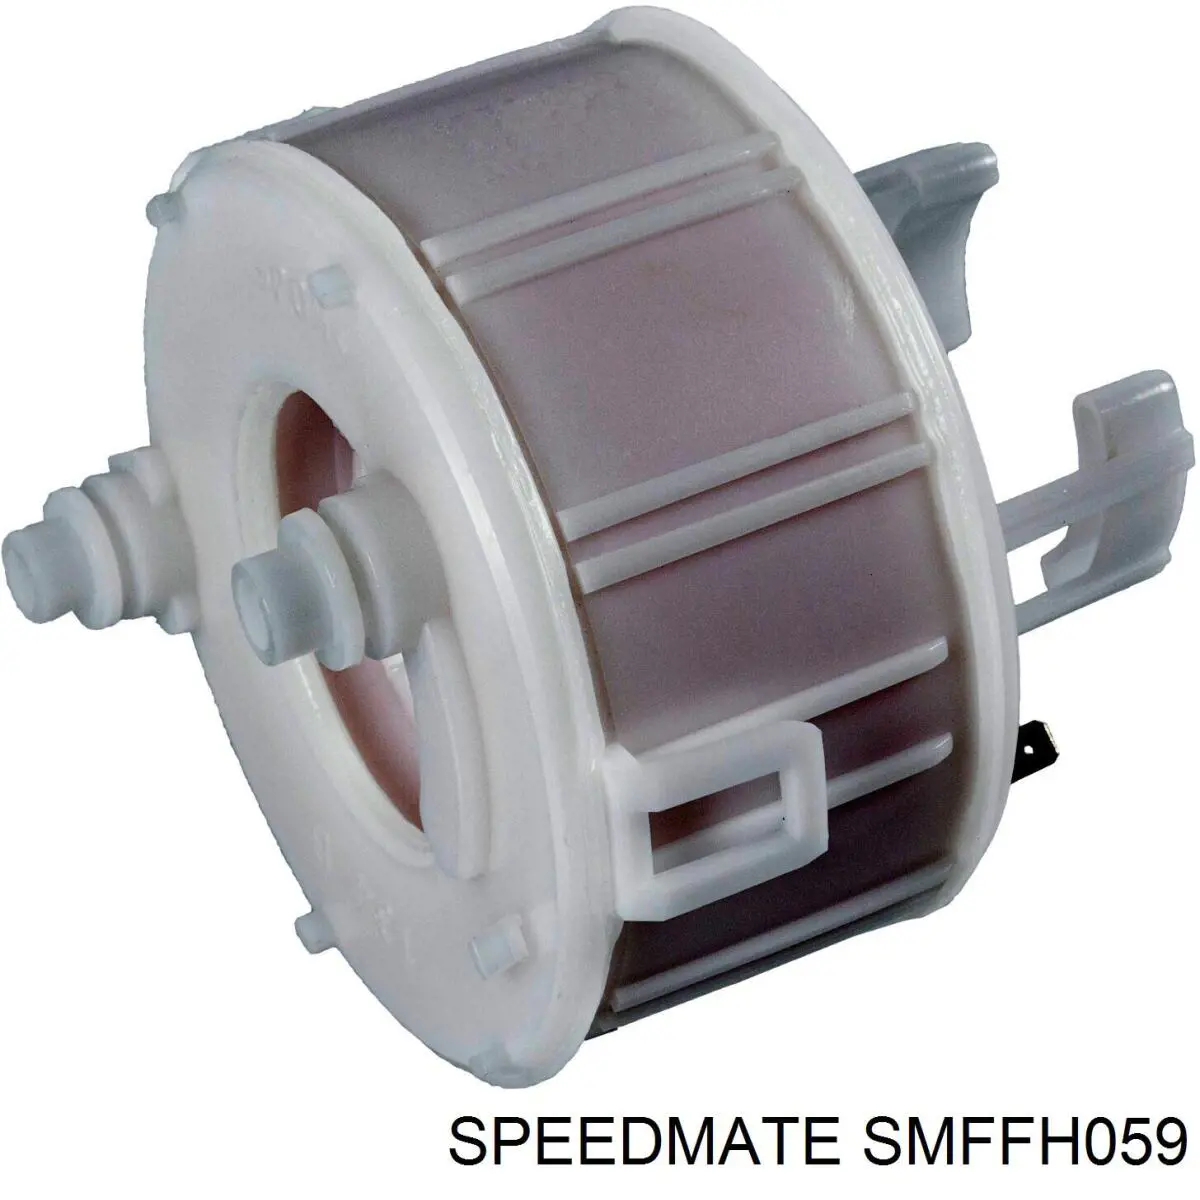 SMFFH059 Speedmate filtro combustible